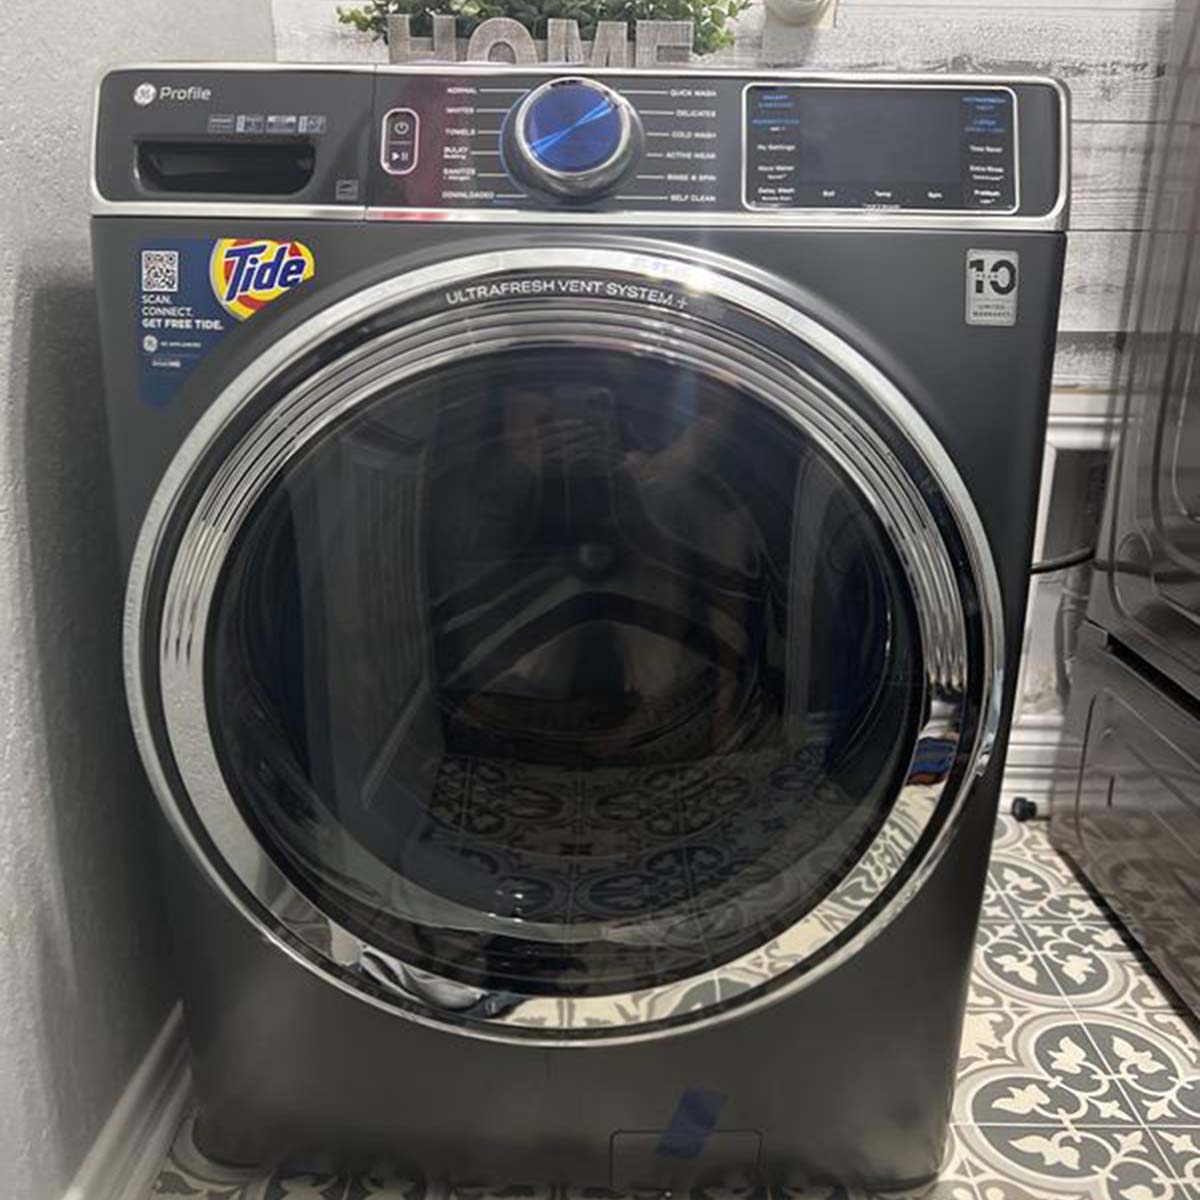 How To Fix The Error Code E74 For GE Washing Machine